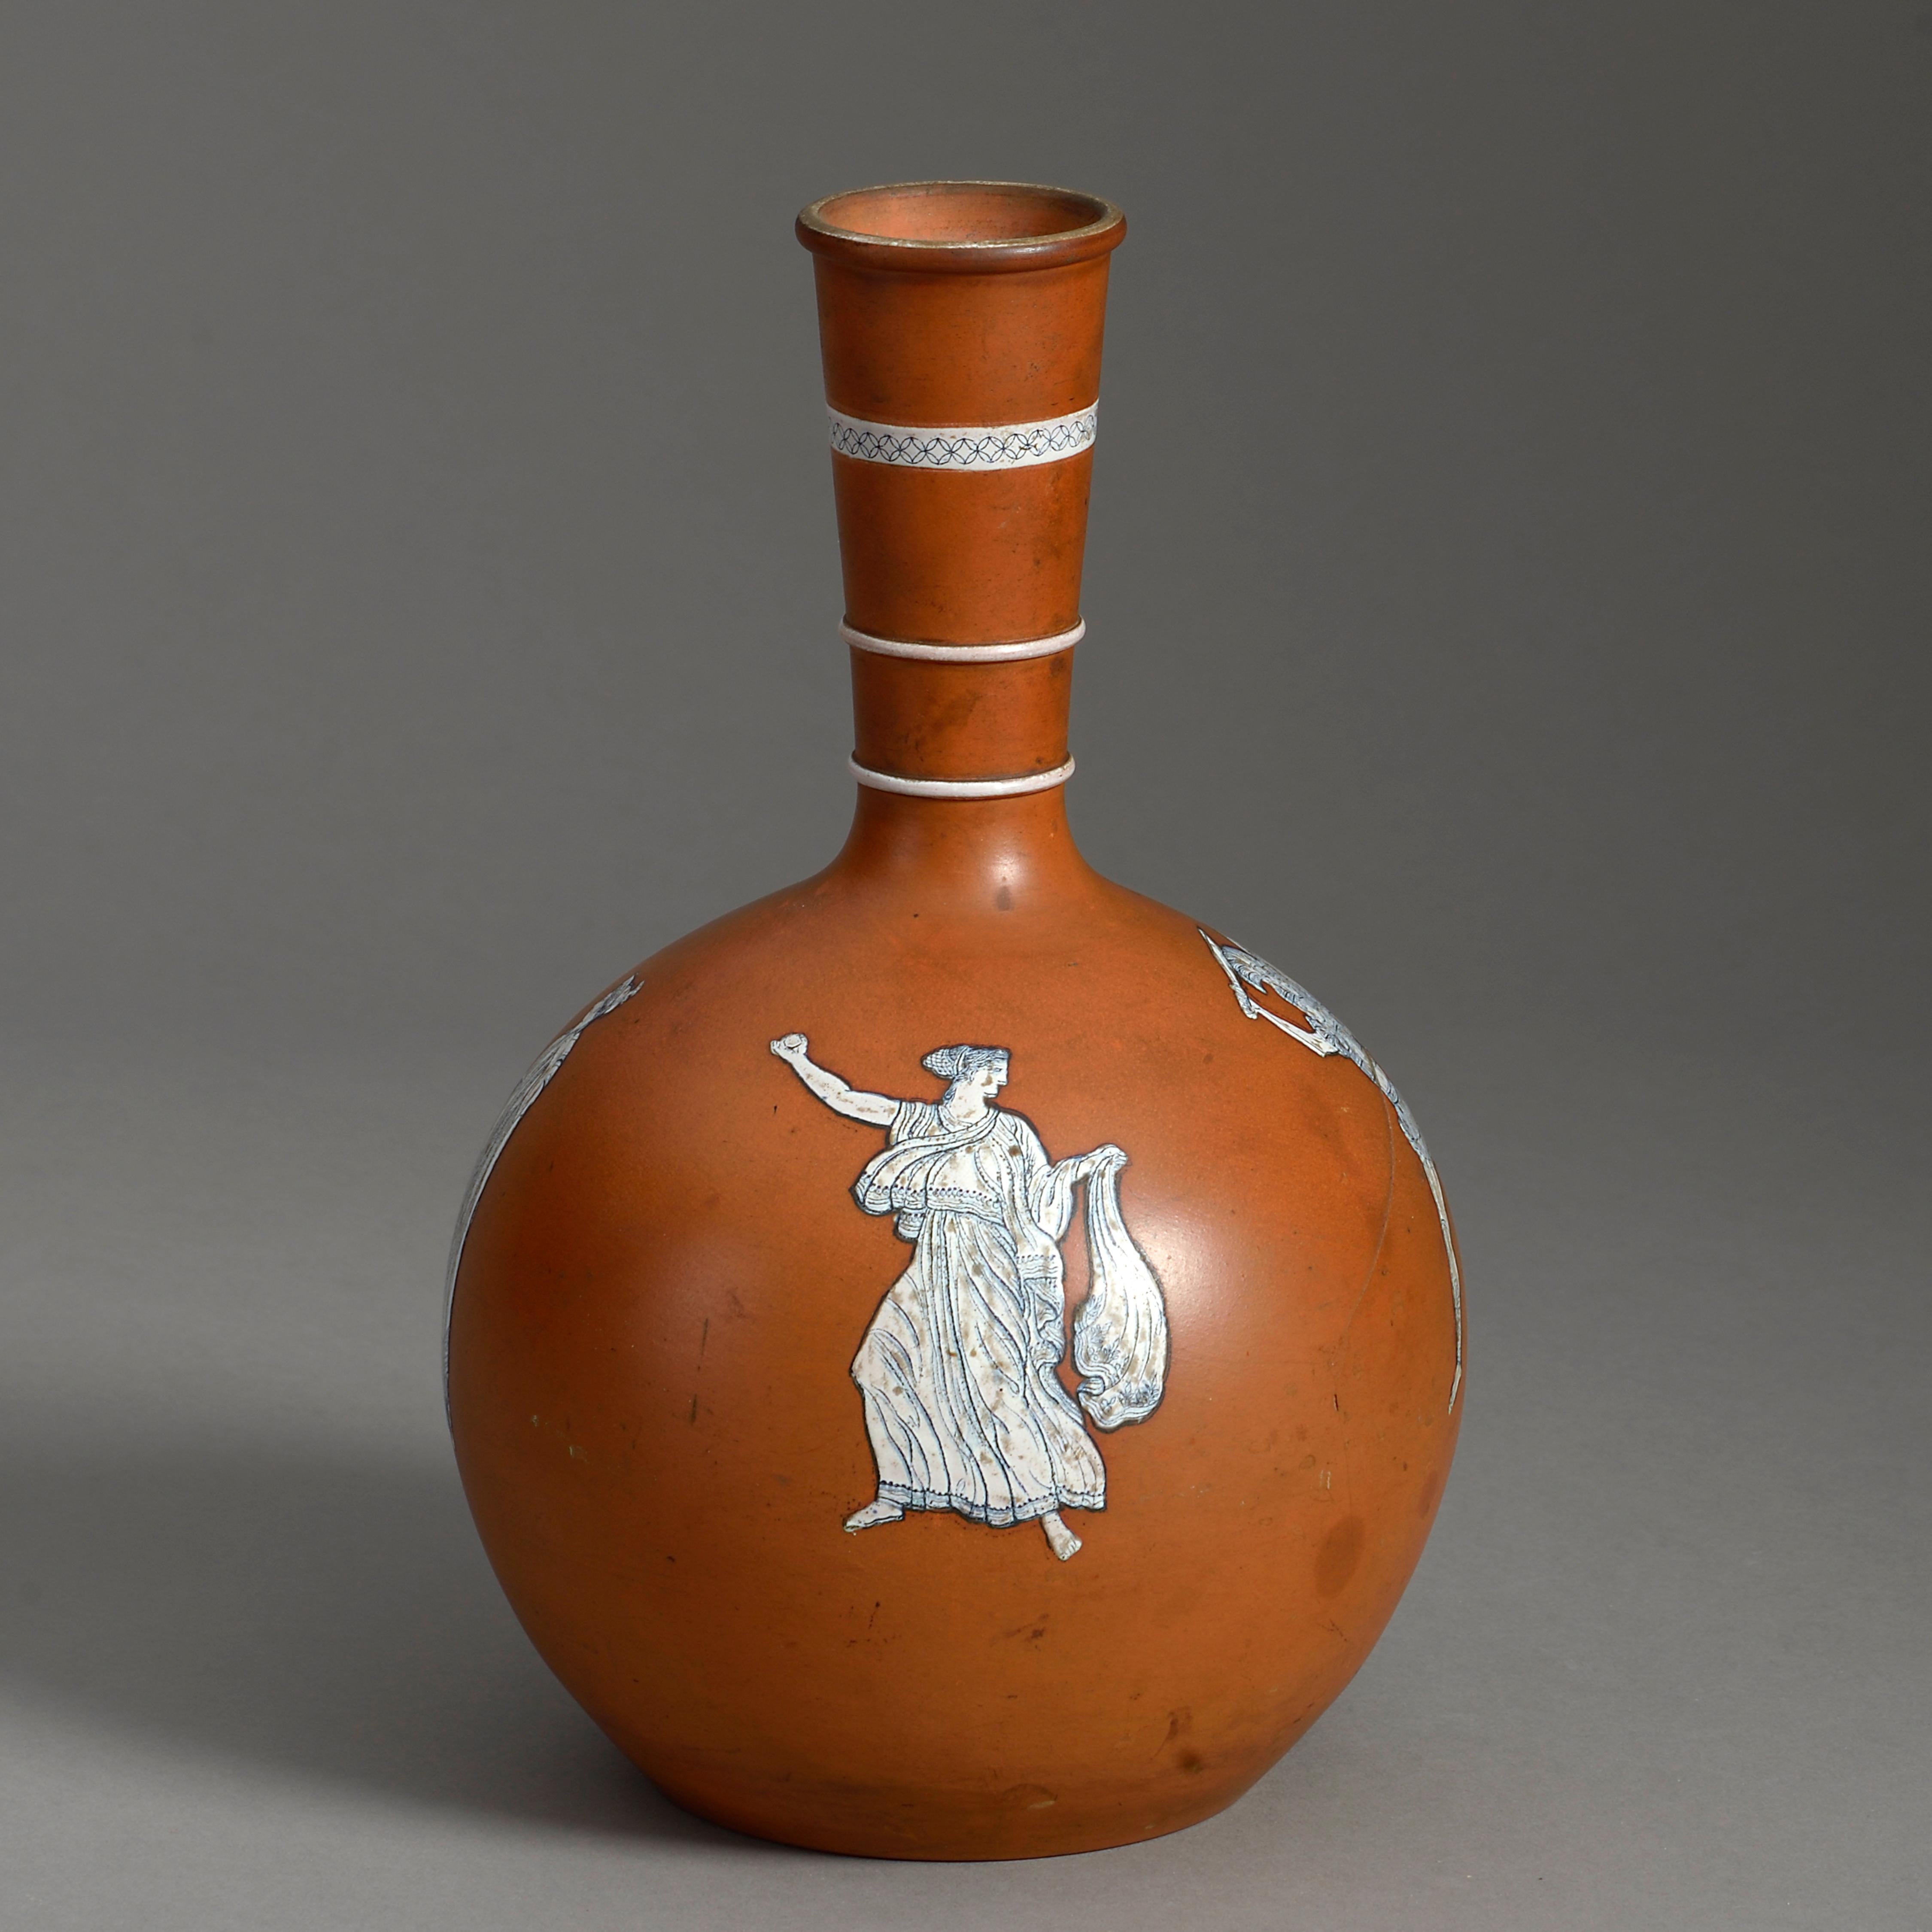 An early twentieth century terracotta vase in the Attic taste, of bottle form, the red clay surface inset with monochrome glazed figures representing the arts and war.